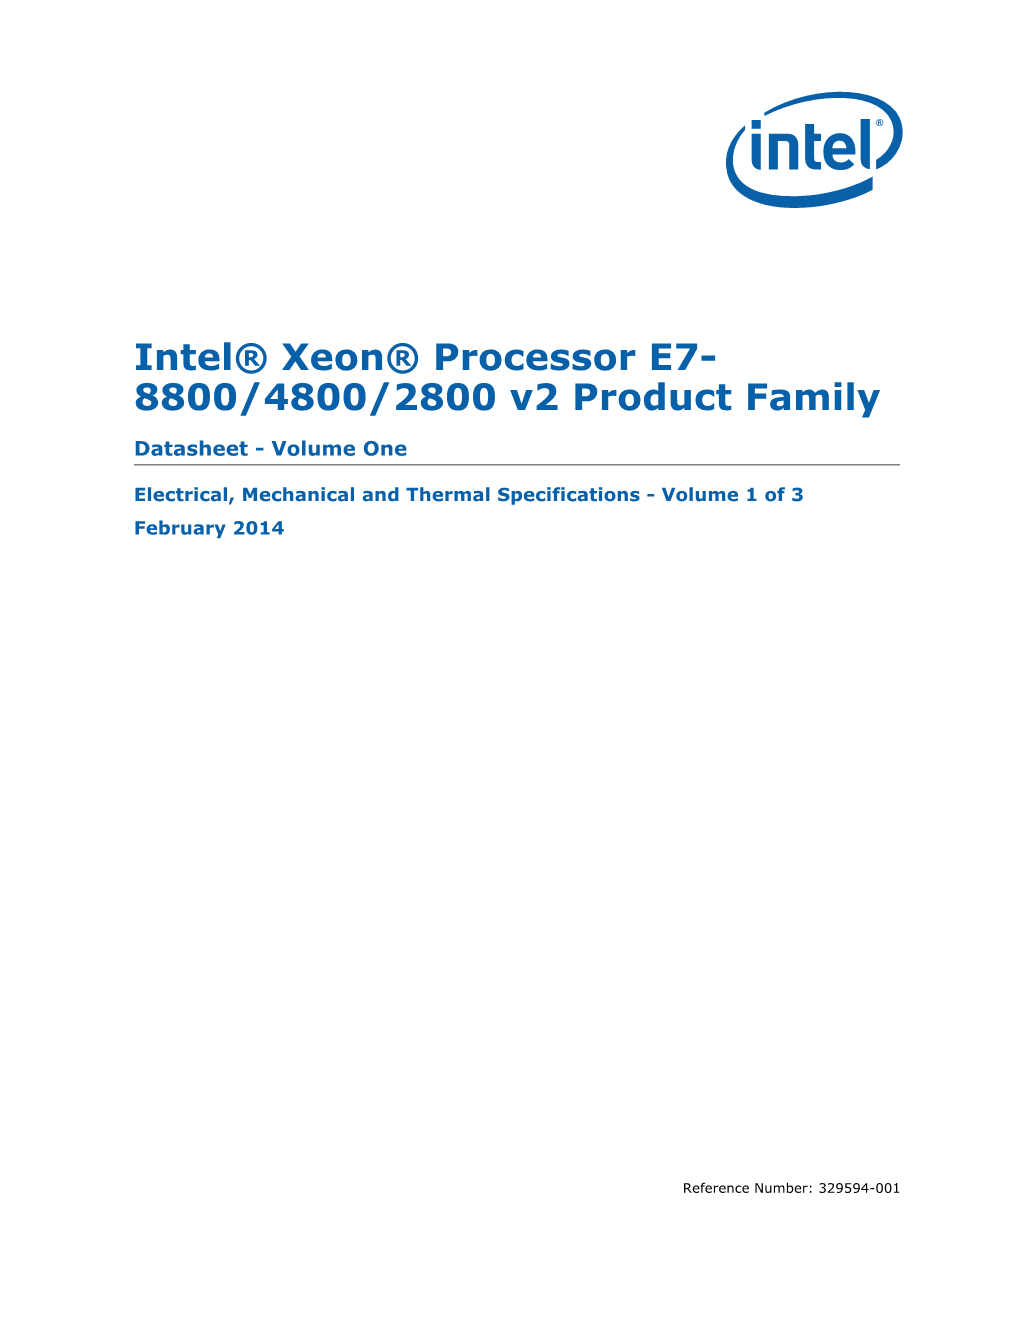 Intel® Xeon® Processor E7-8800/4800/2800 V2 Product Family Datasheet Volume One, February 2014 Table of Contents